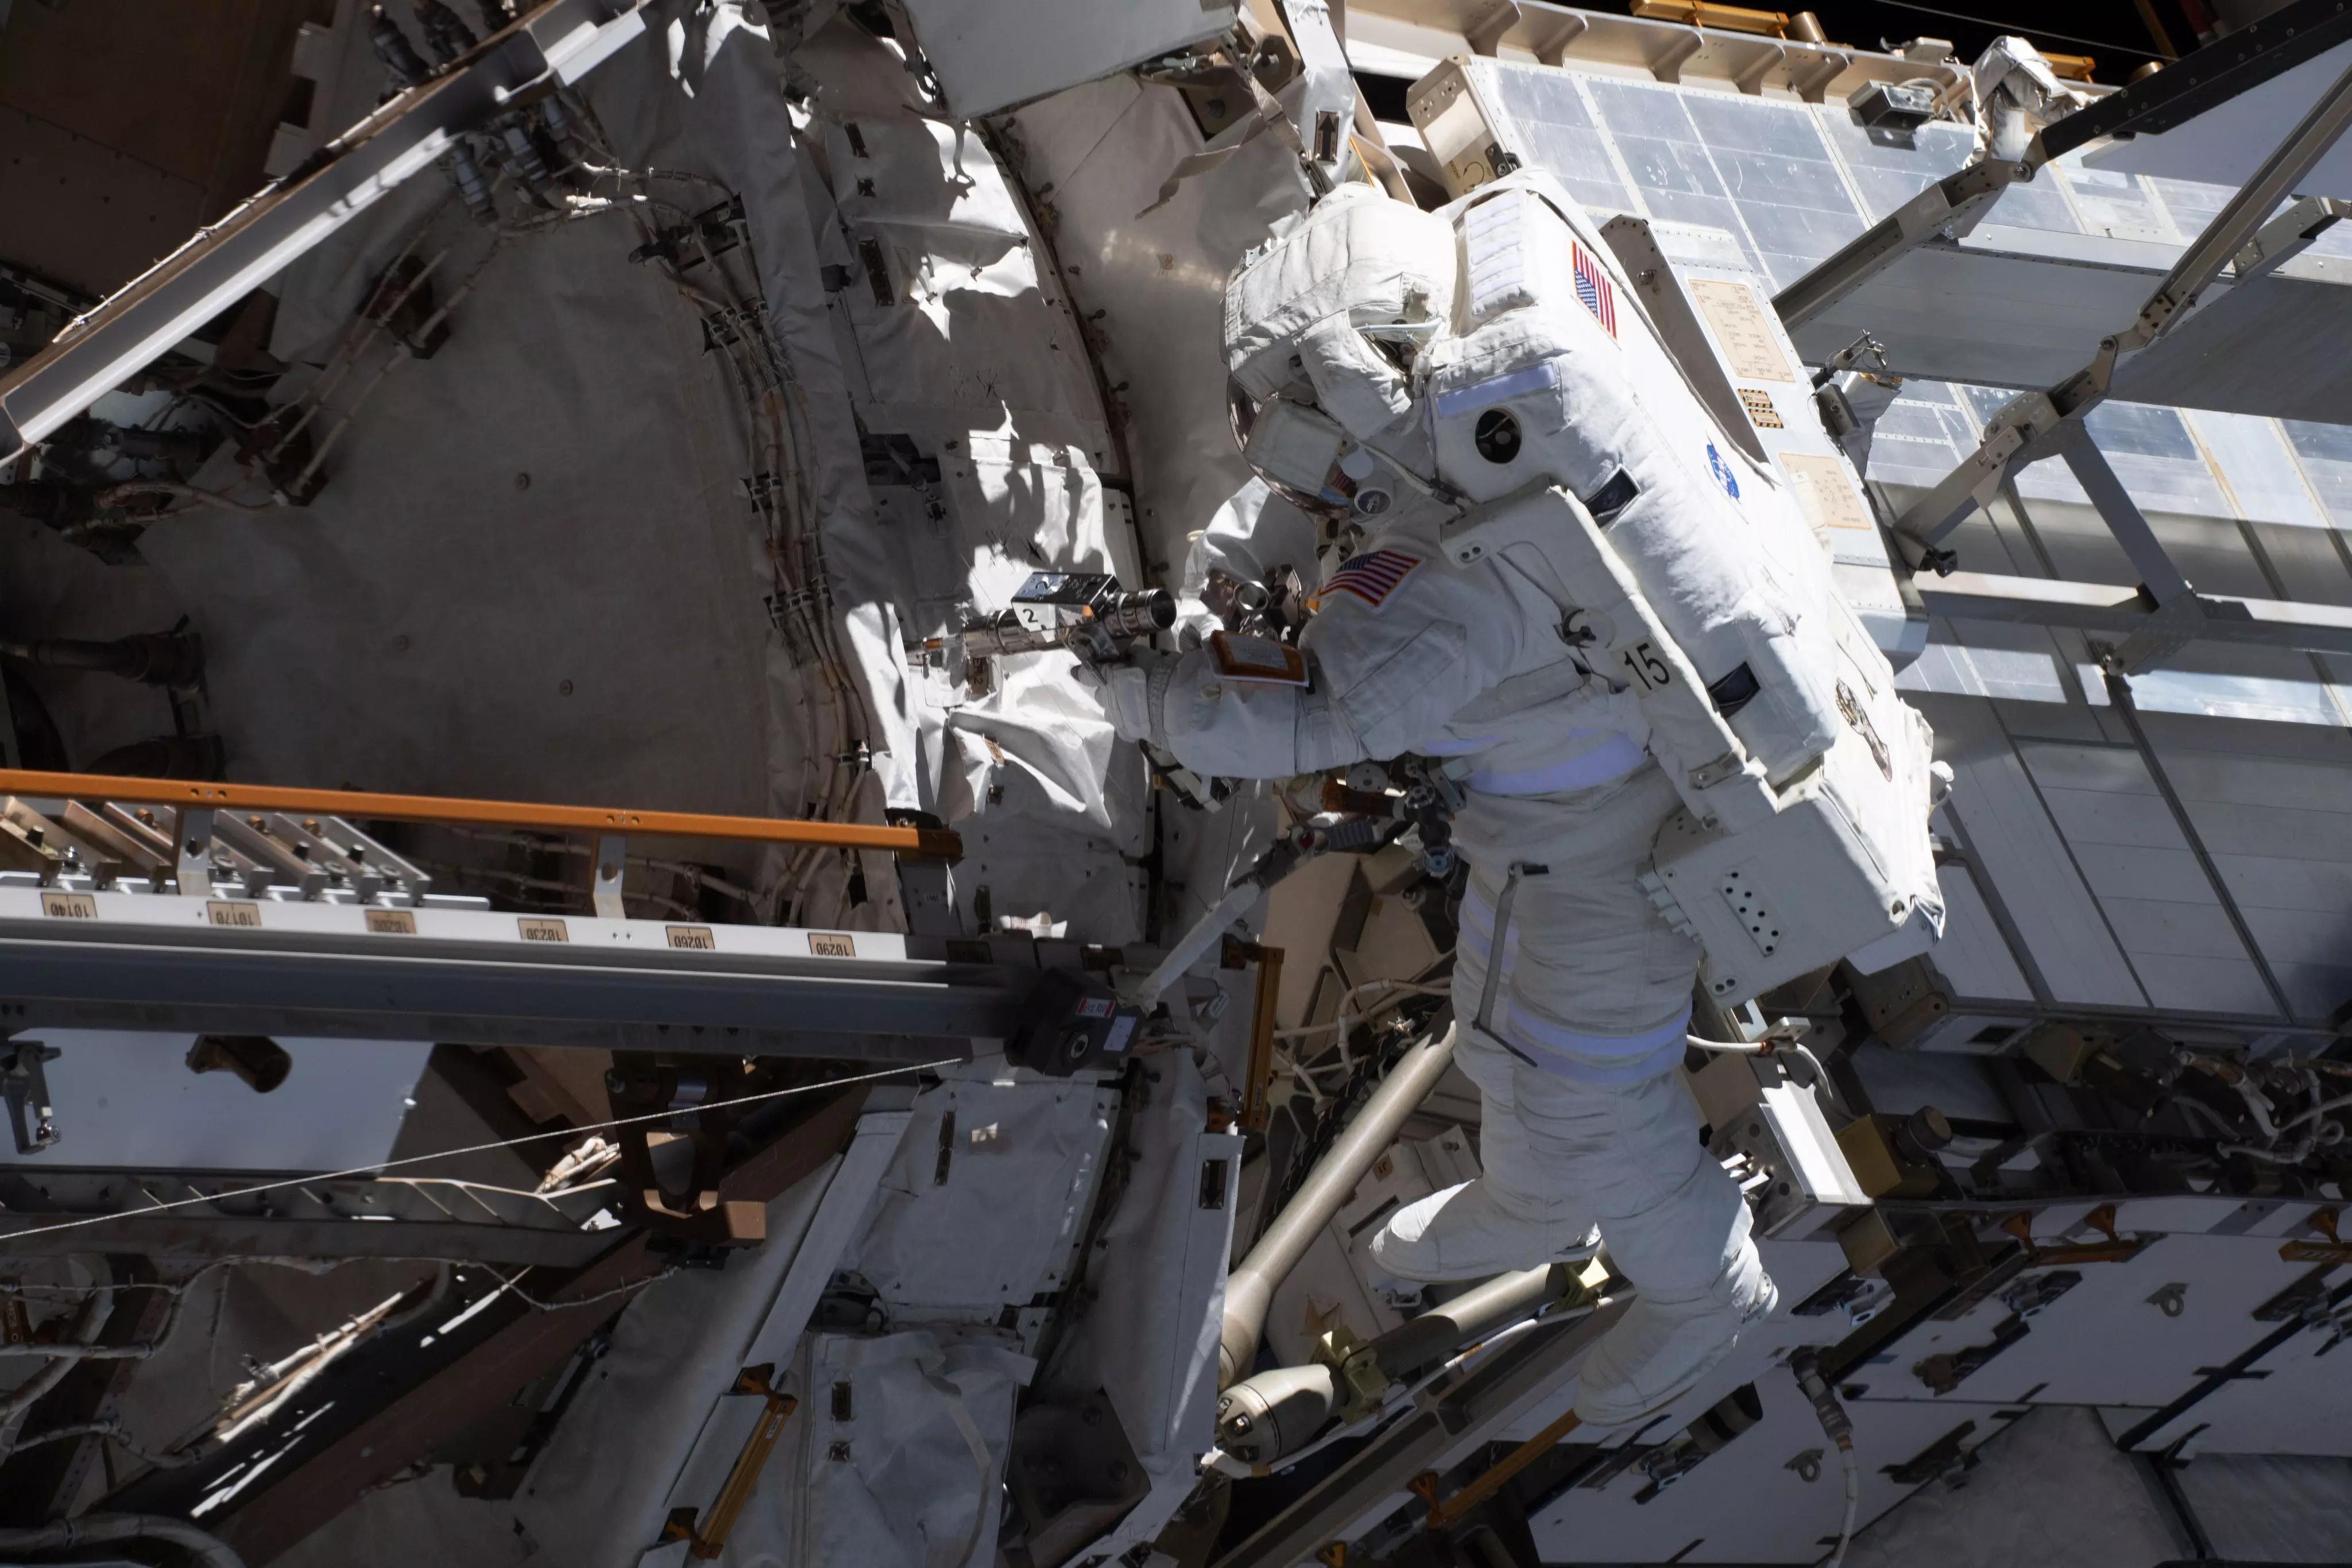 Latest space junk to orbit Earth: A $100,000 tool bag lost by astronauts